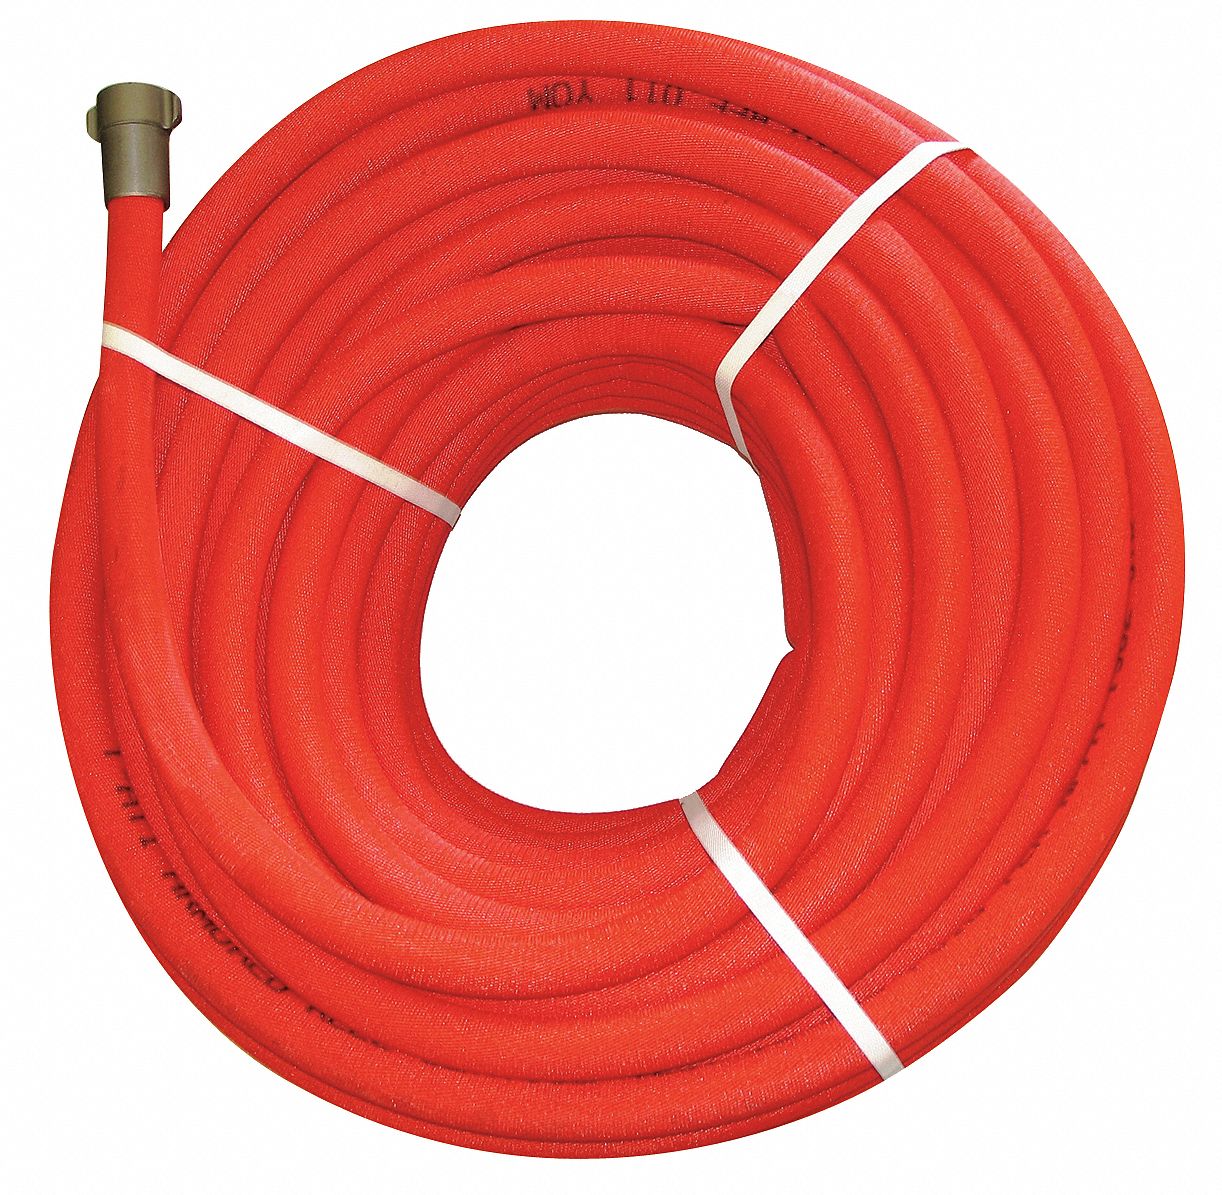 Booster Fire Hose: 1-1/4 in x 1-1/4 in Fitting Size, Polyurethane, Rocker Coupling Lug, Red